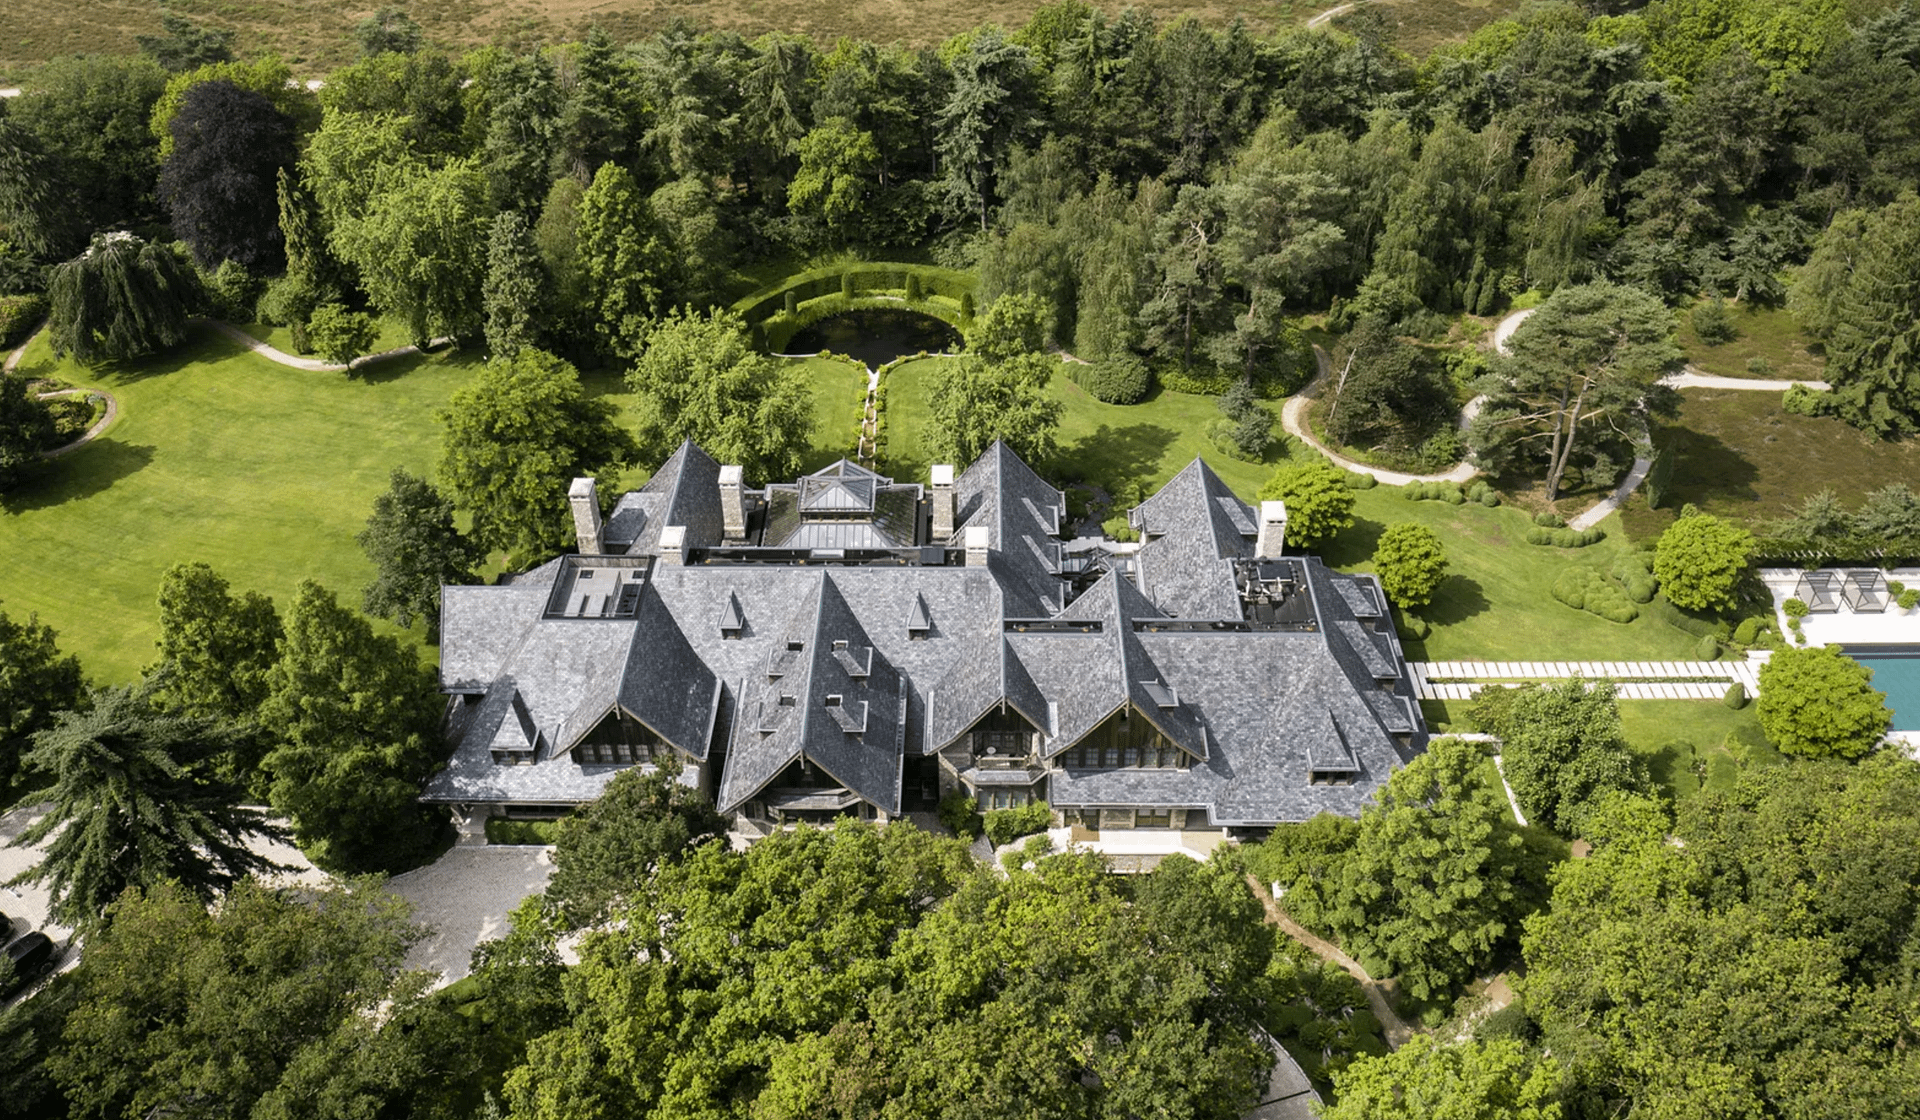 Incredible Estate In The Netherlands (PHOTOS)